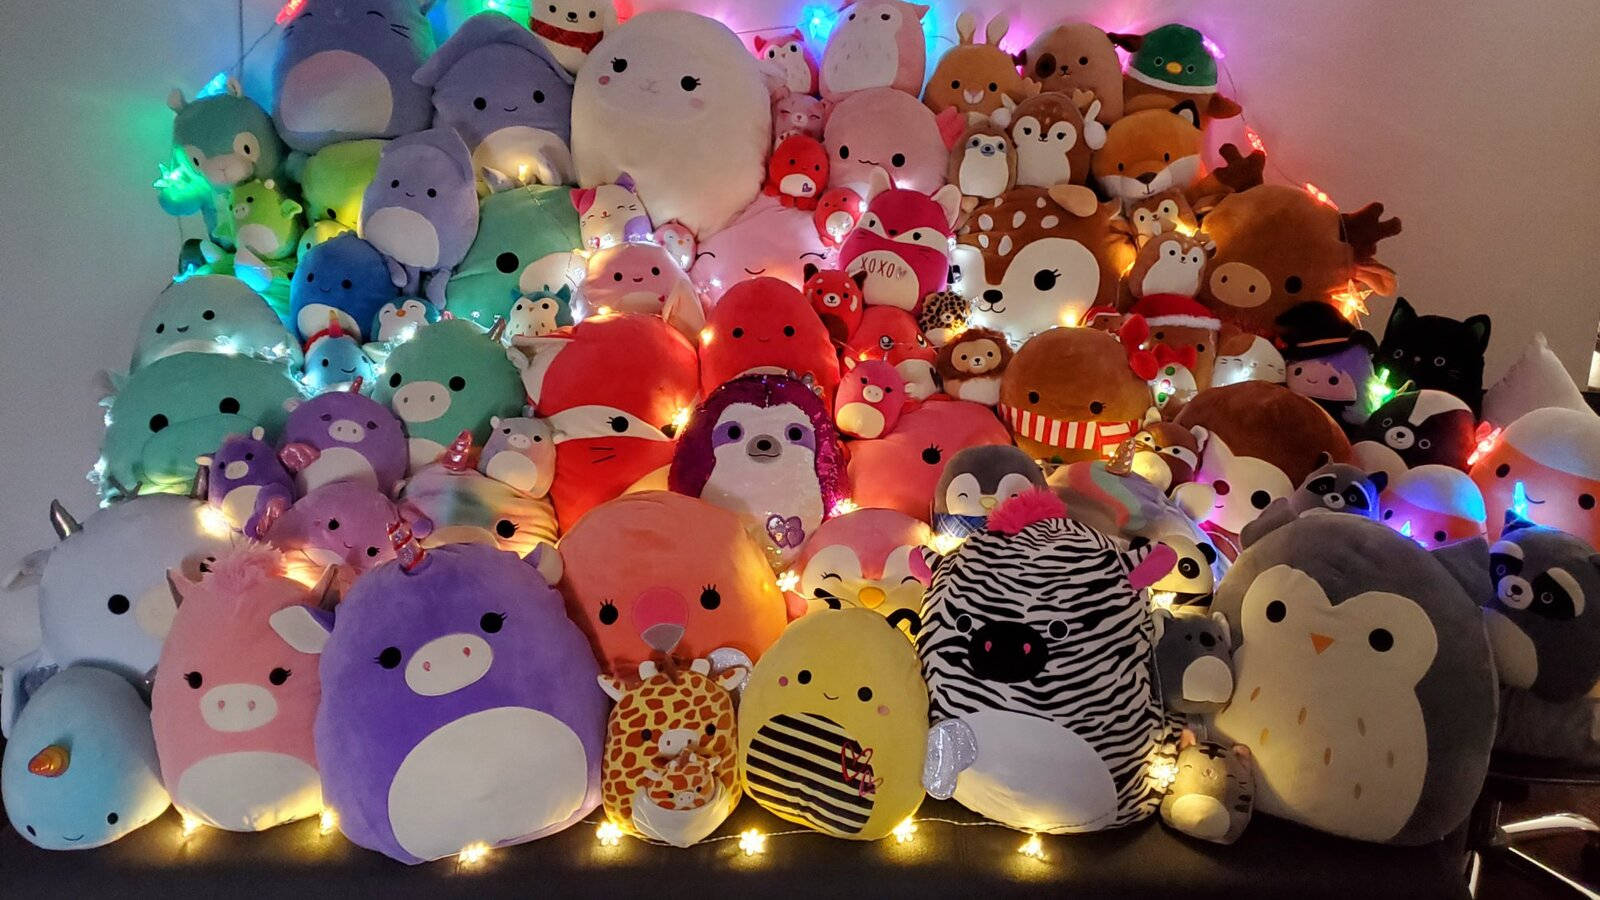 Squishmallows Toy Collection With Light Wallpaper